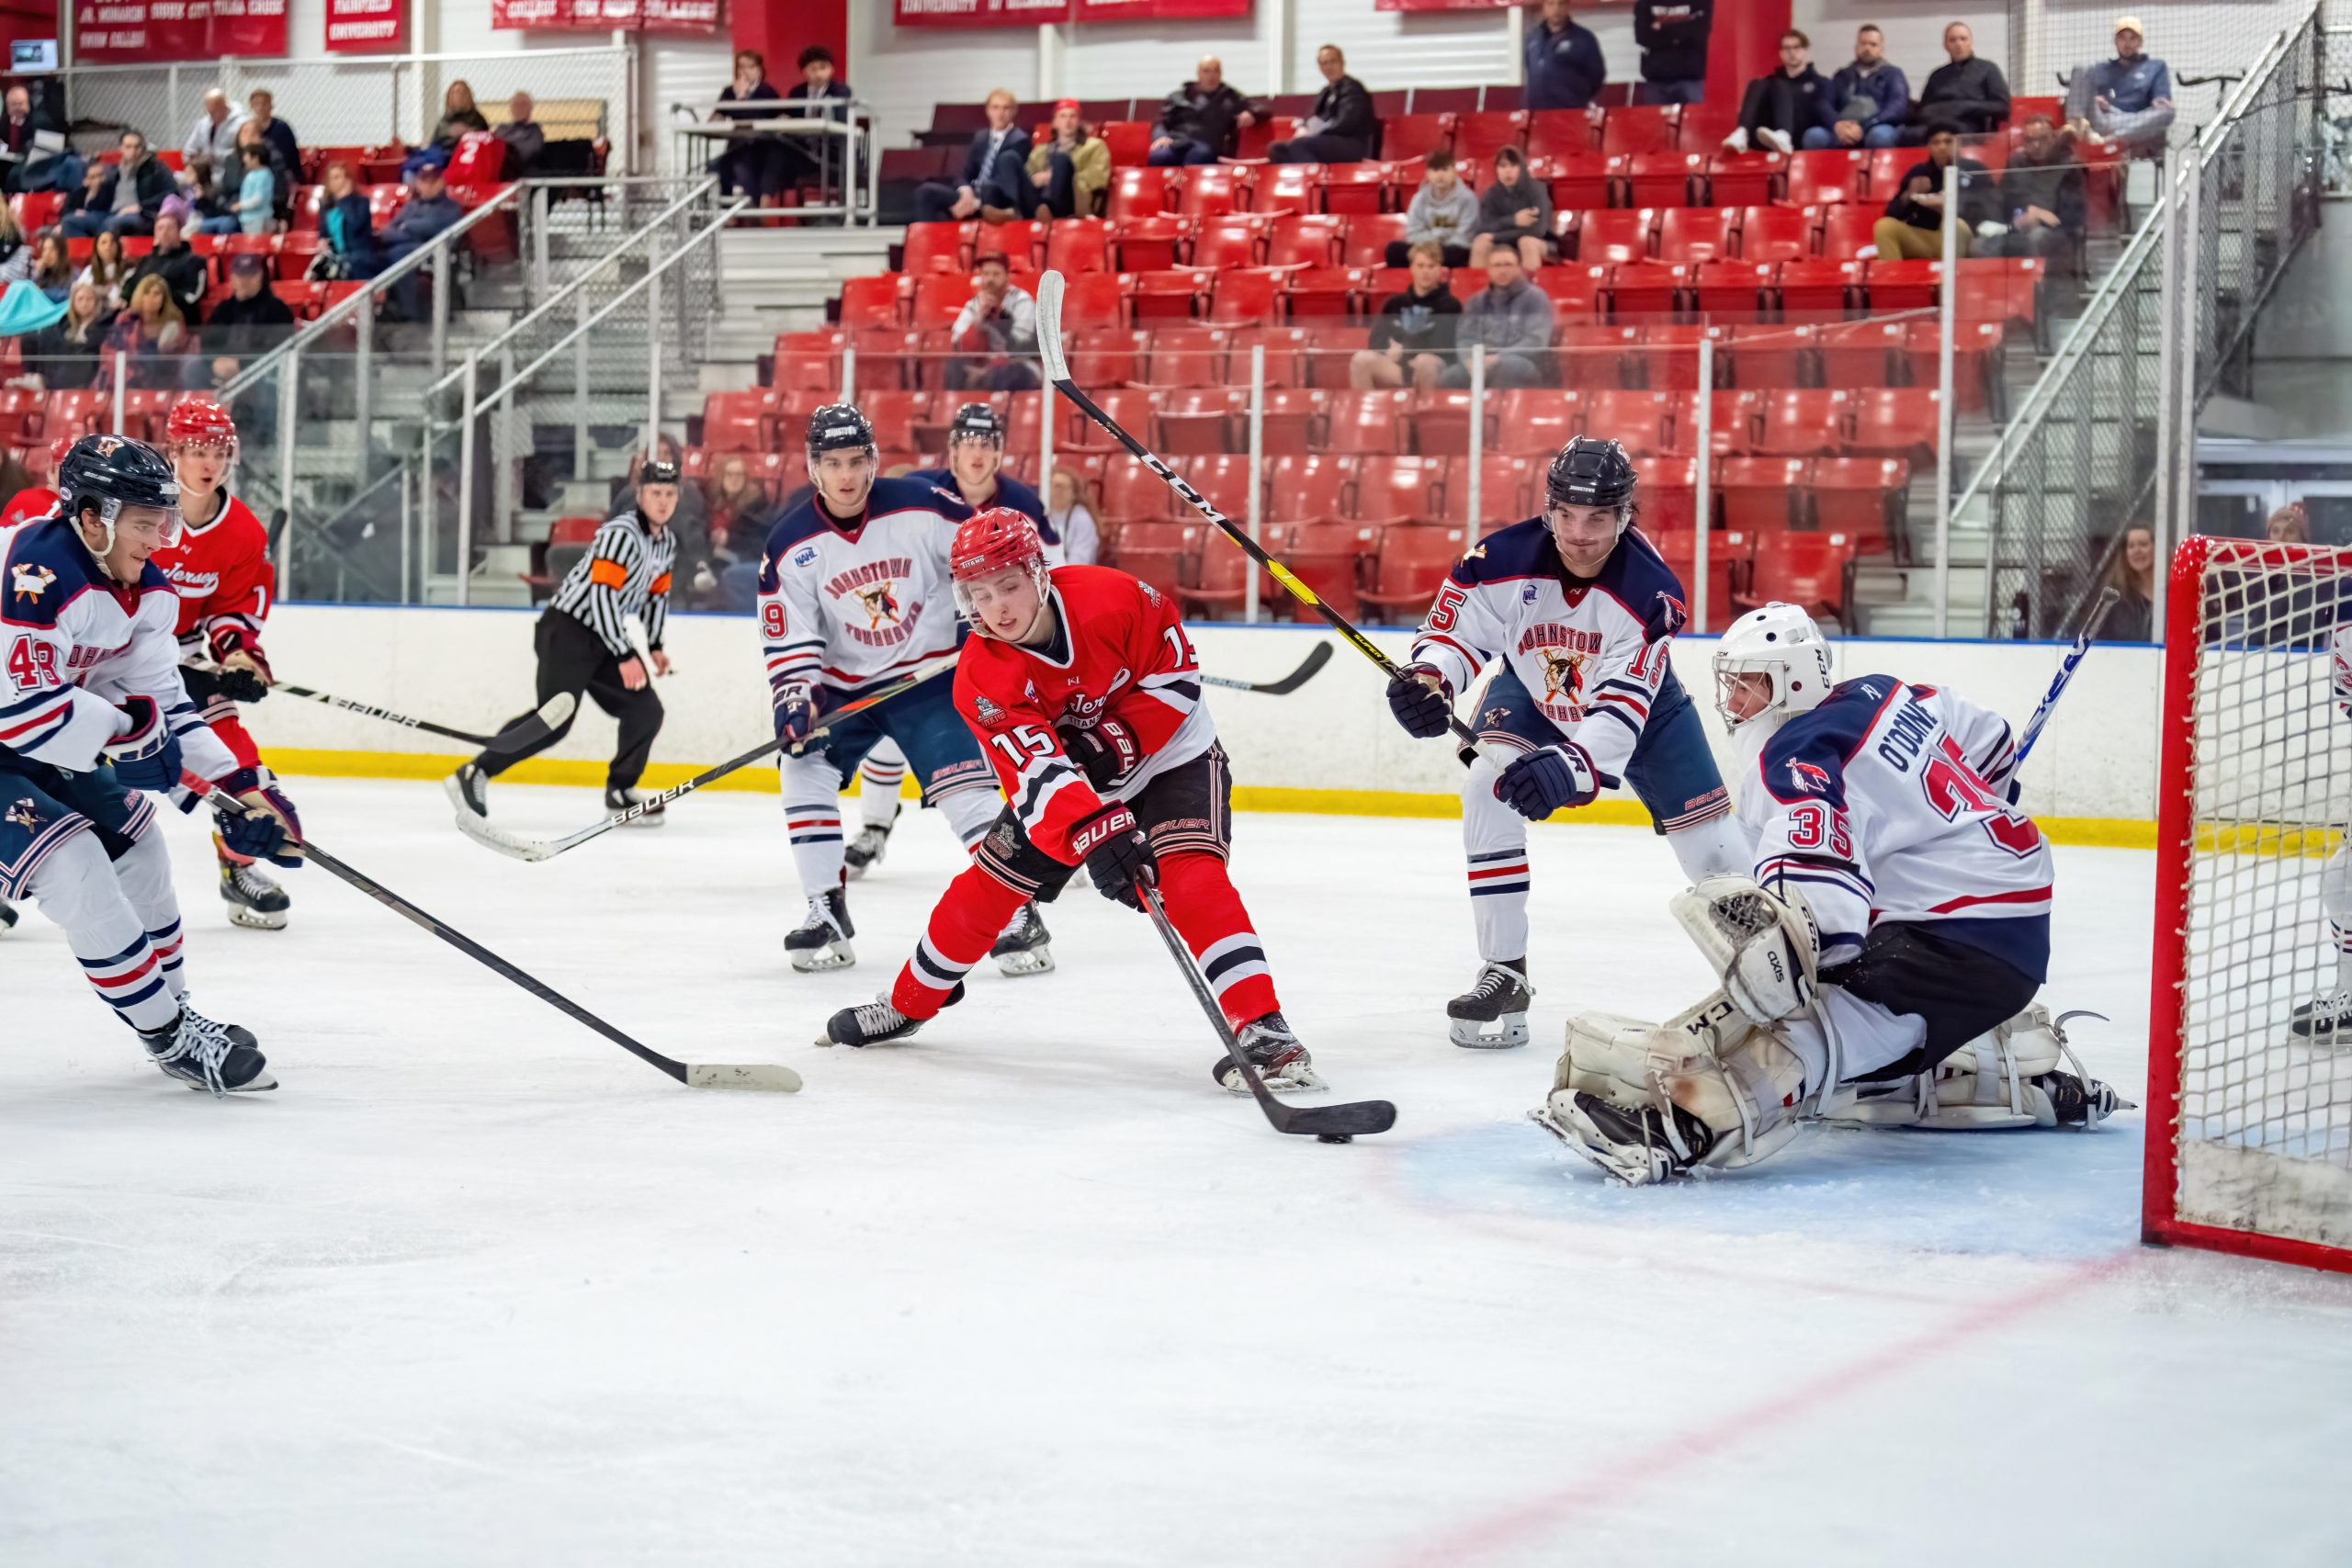 Comeback falls short as Titans lose to Tomahawks 4 – 3 in OT